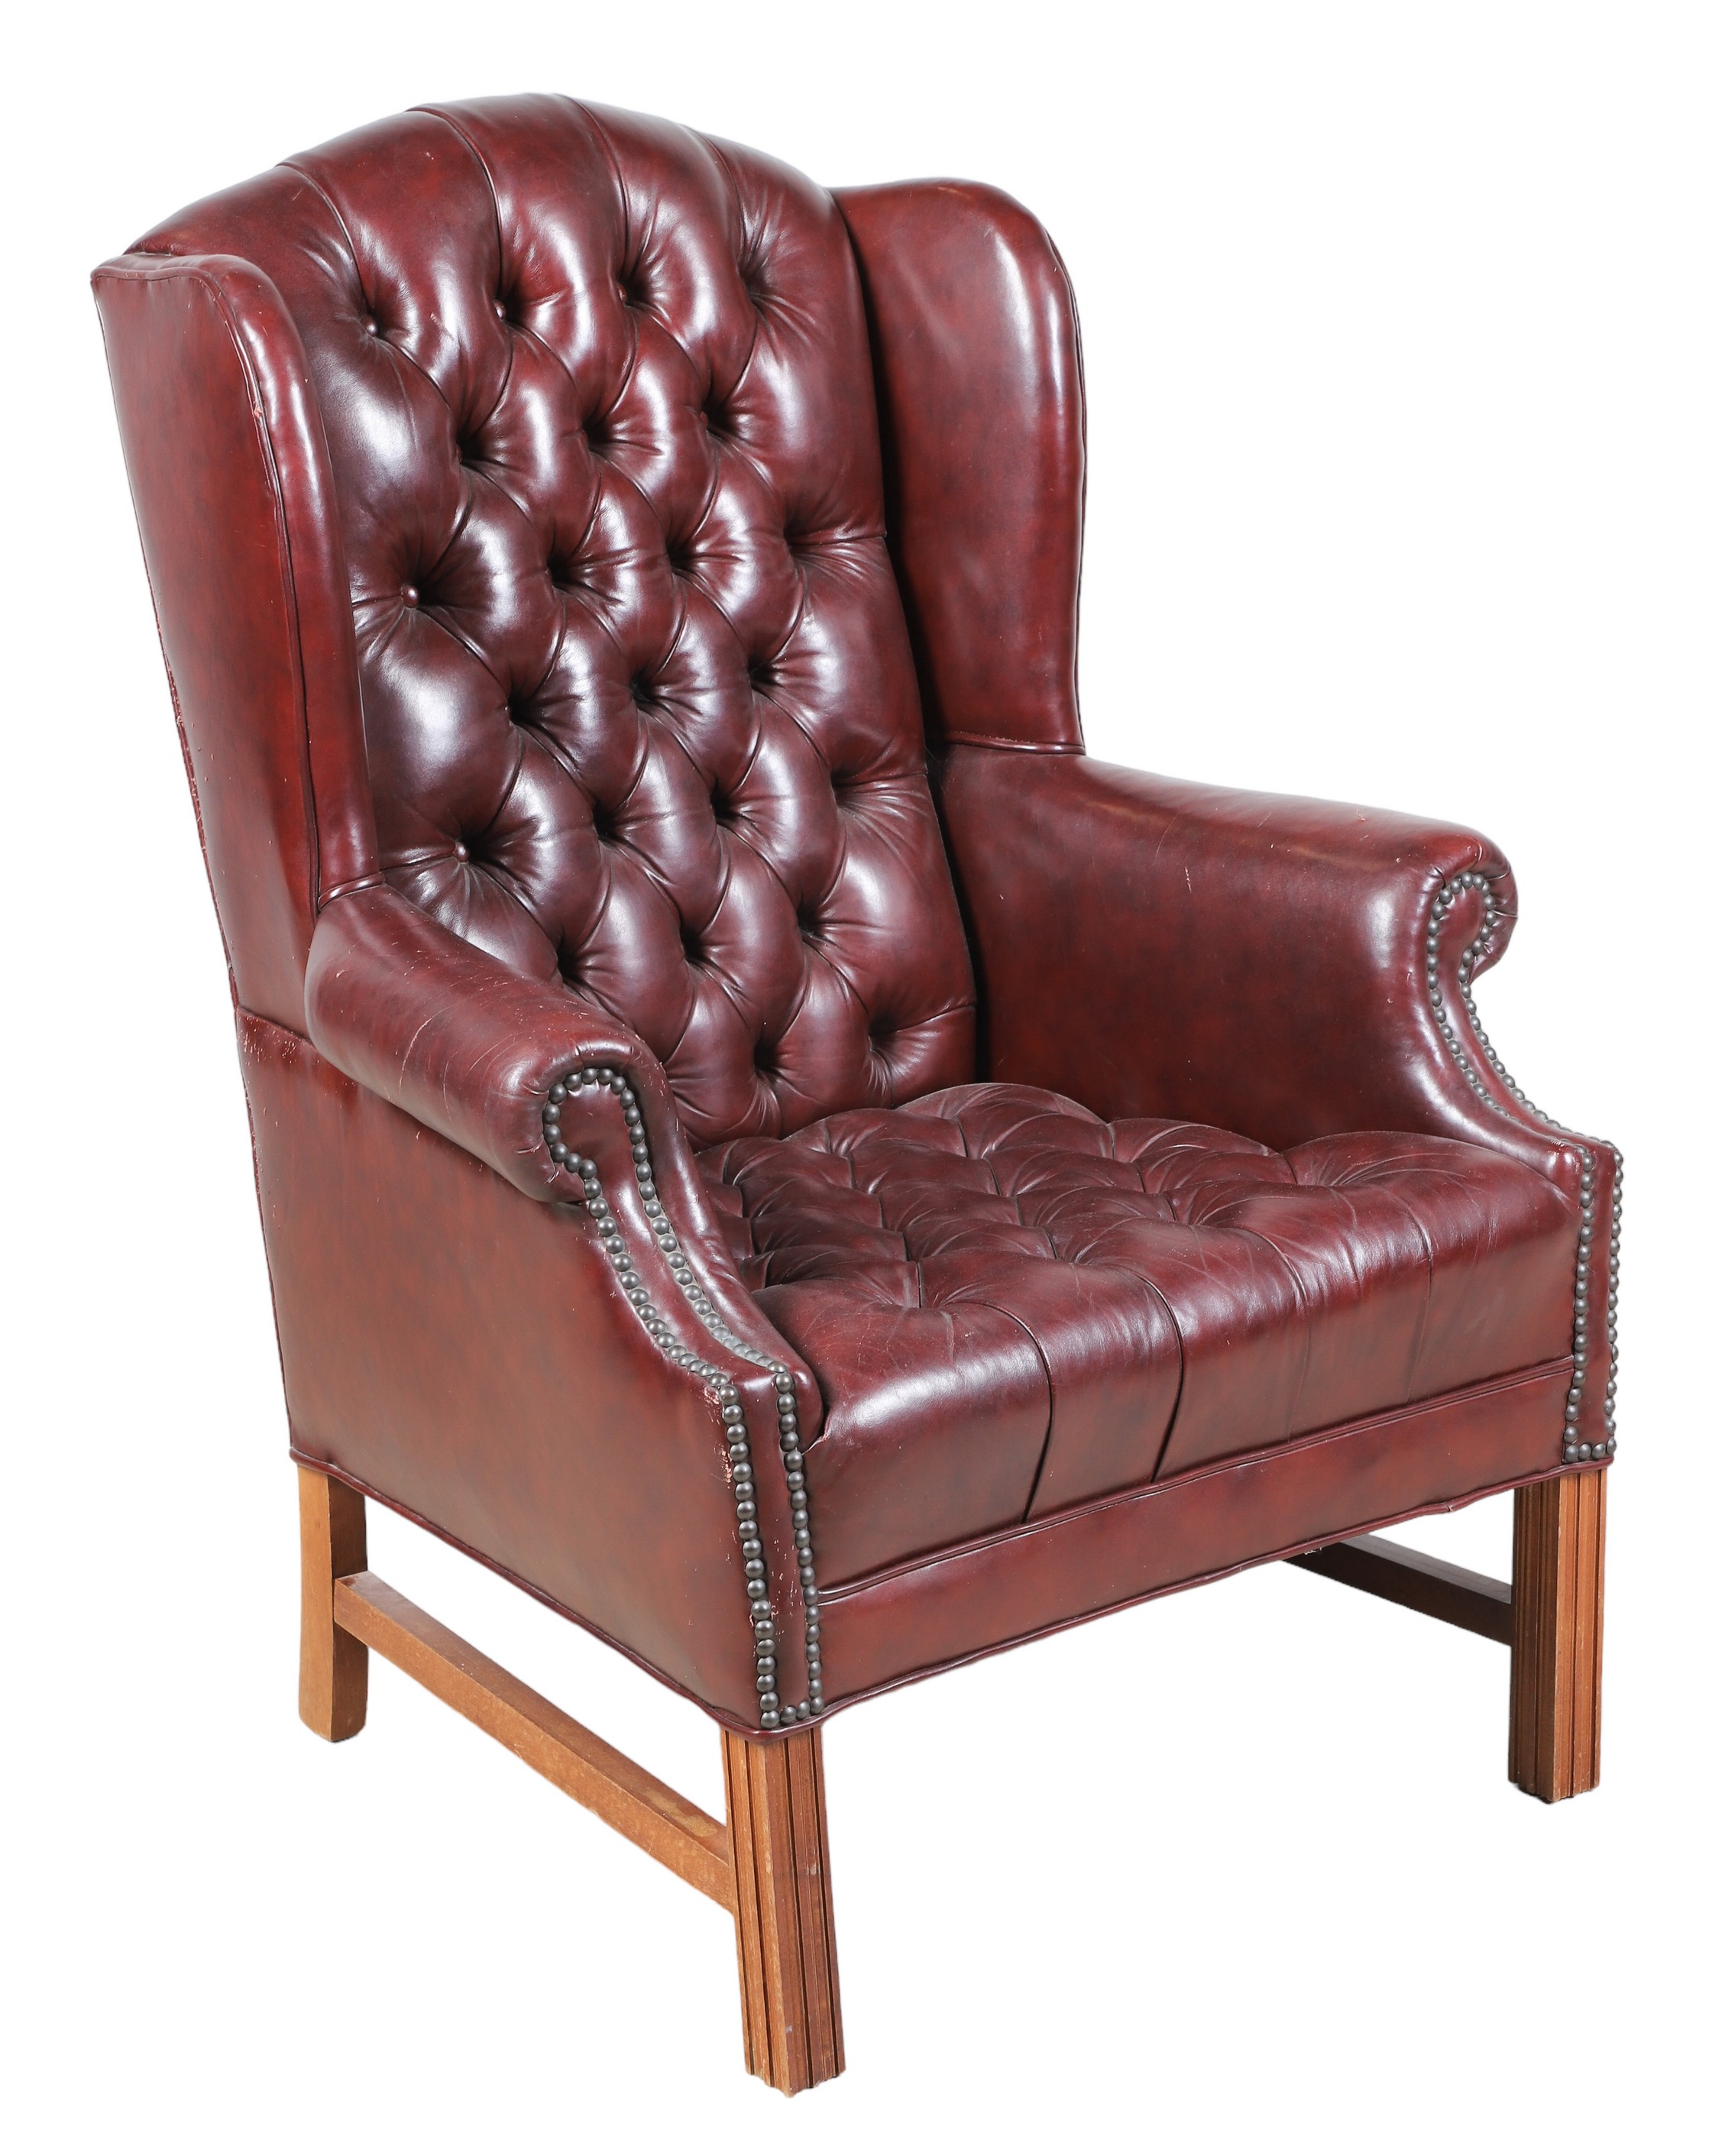 Chippendale style tufted leather